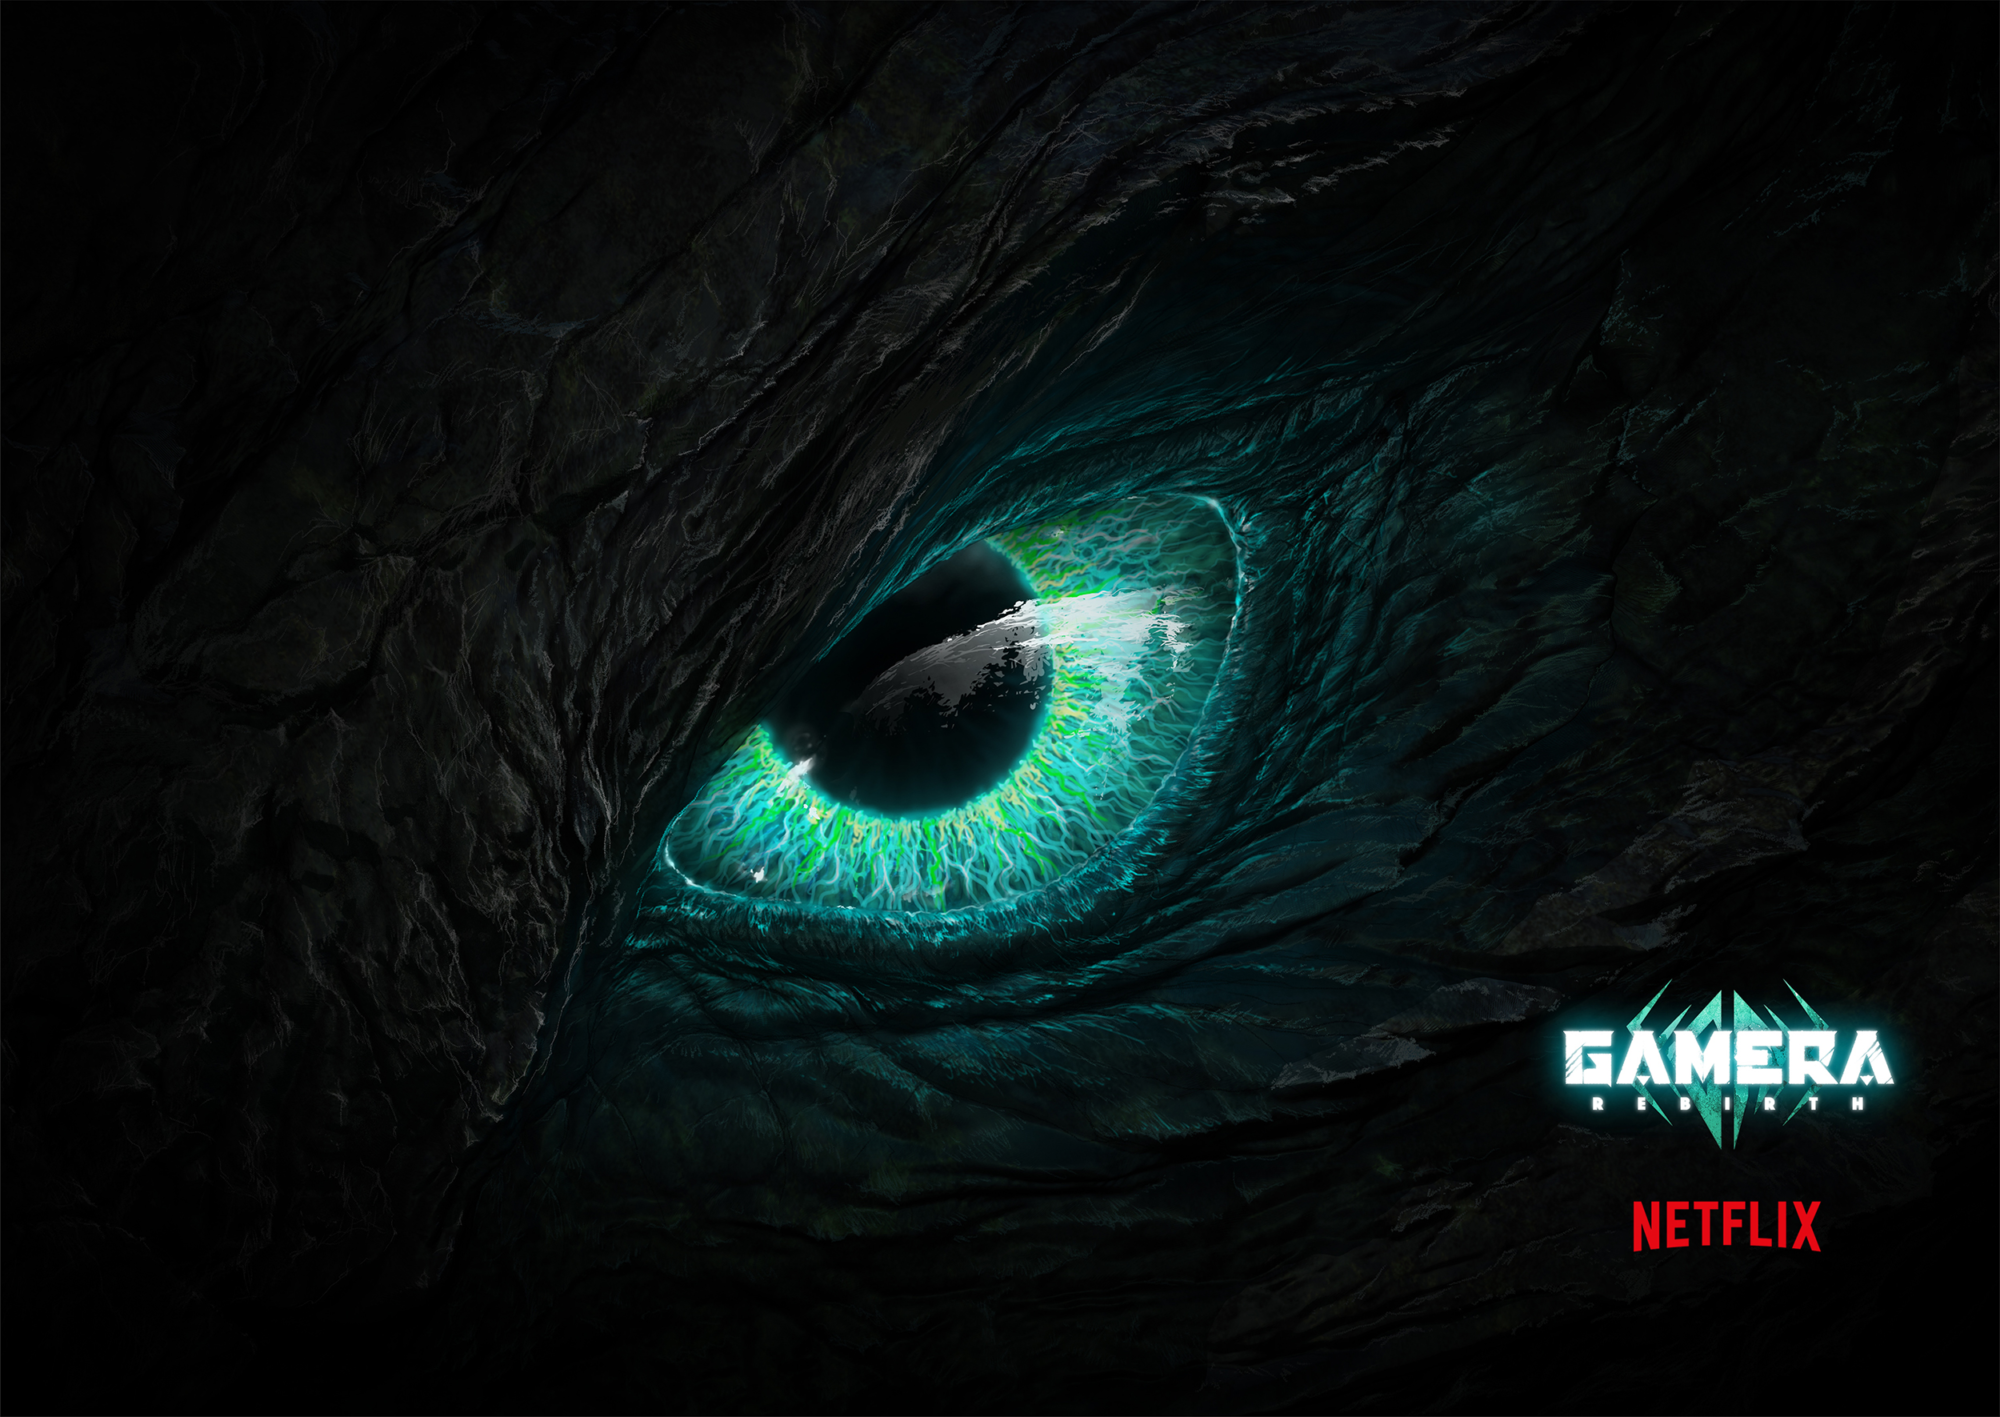 First Teaser Trailer and New Kaiju Poster for Gamera: Rebirth Now Online!